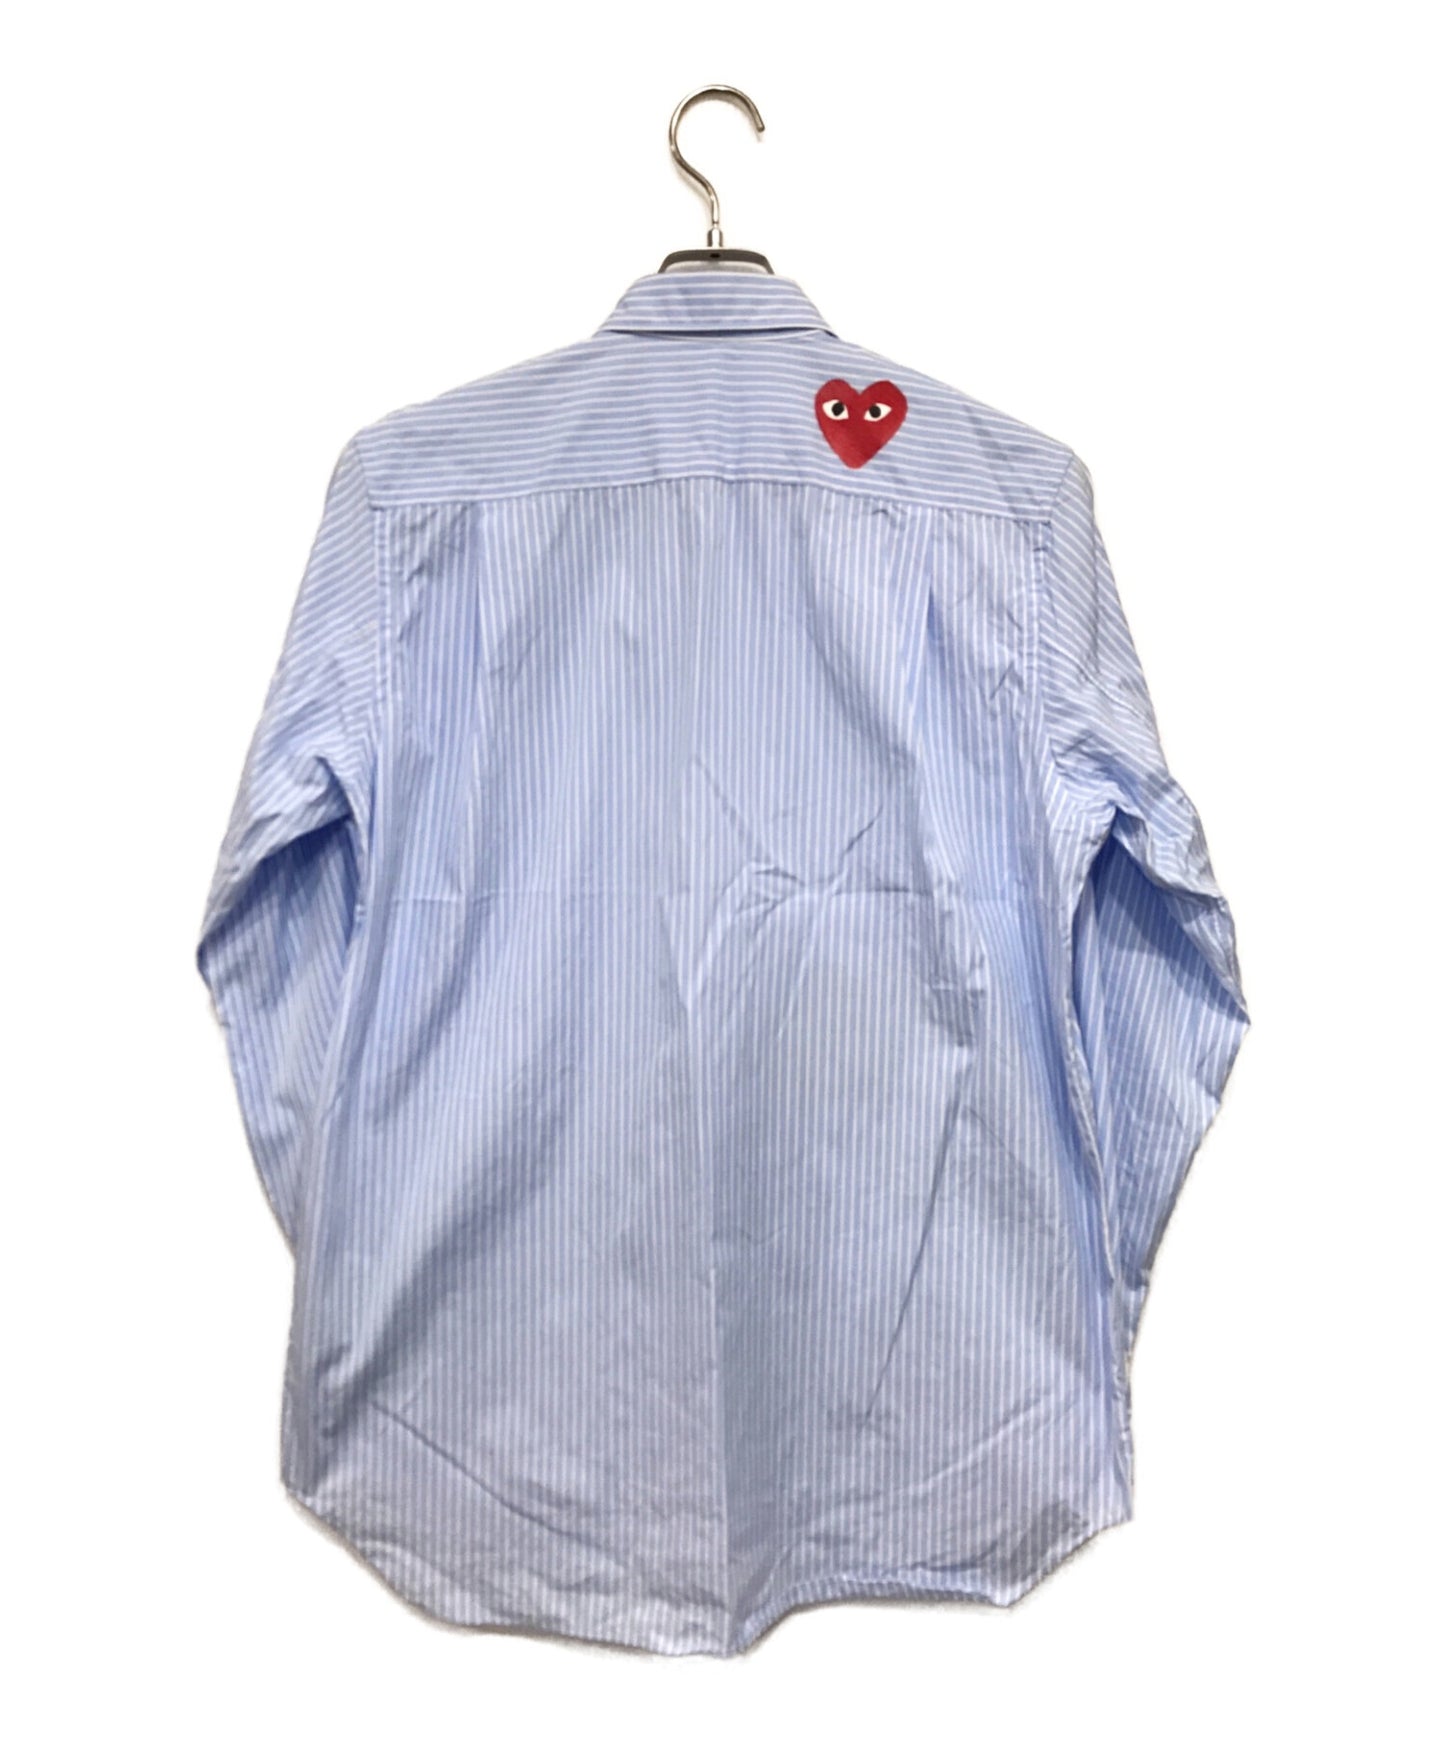 Play Comme des Garcons x North Face Heart Patch Stripe Shirt AE-B202